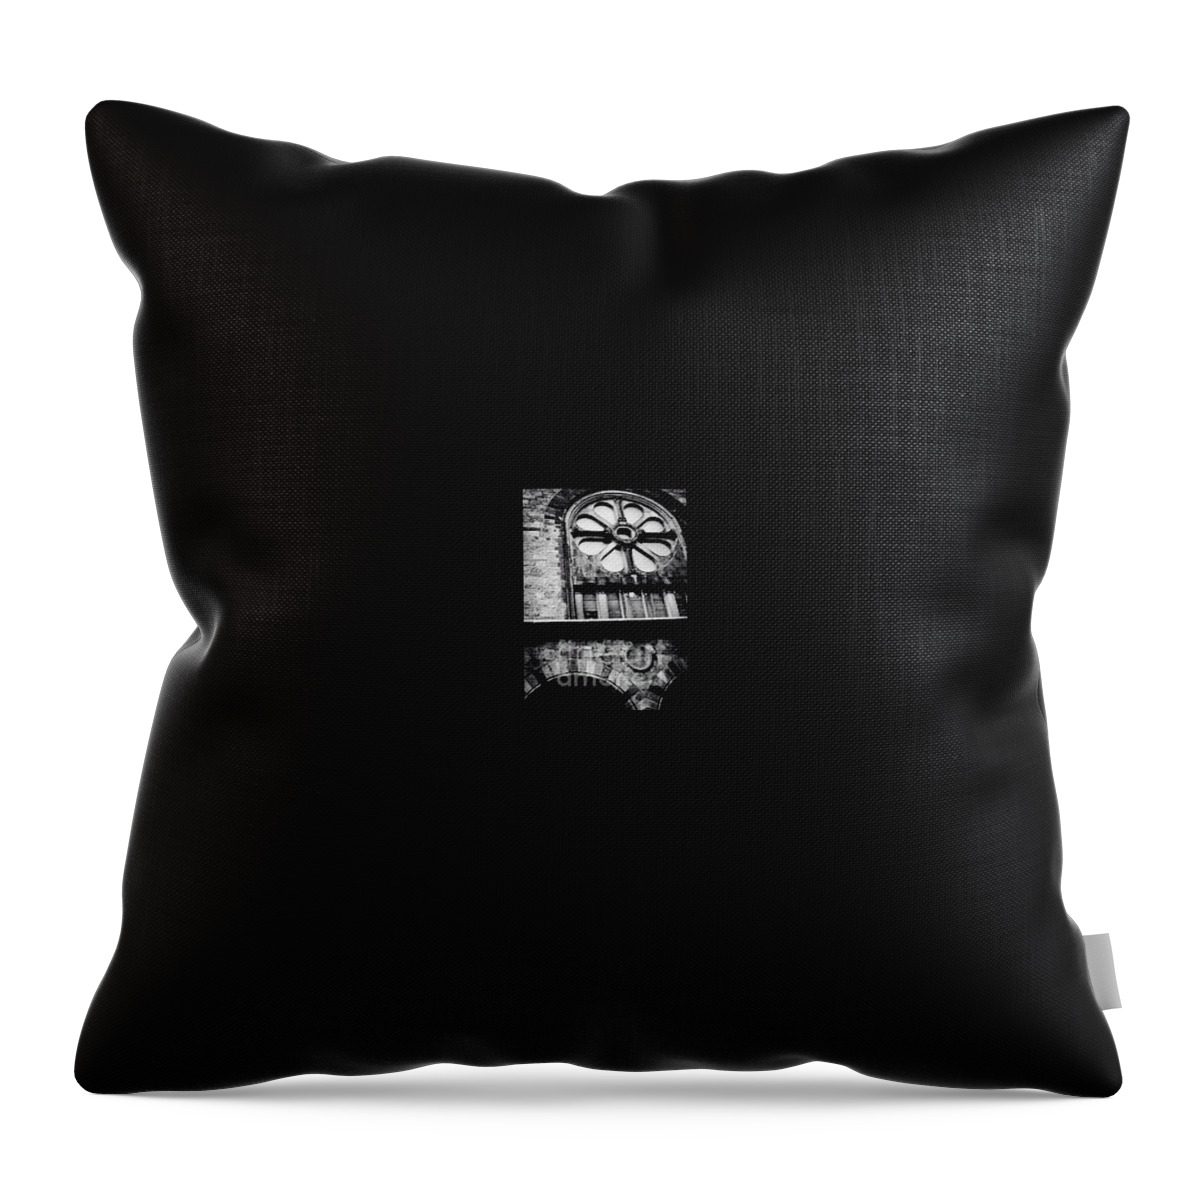 Stone Window Throw Pillow featuring the photograph Windows by Deena Withycombe